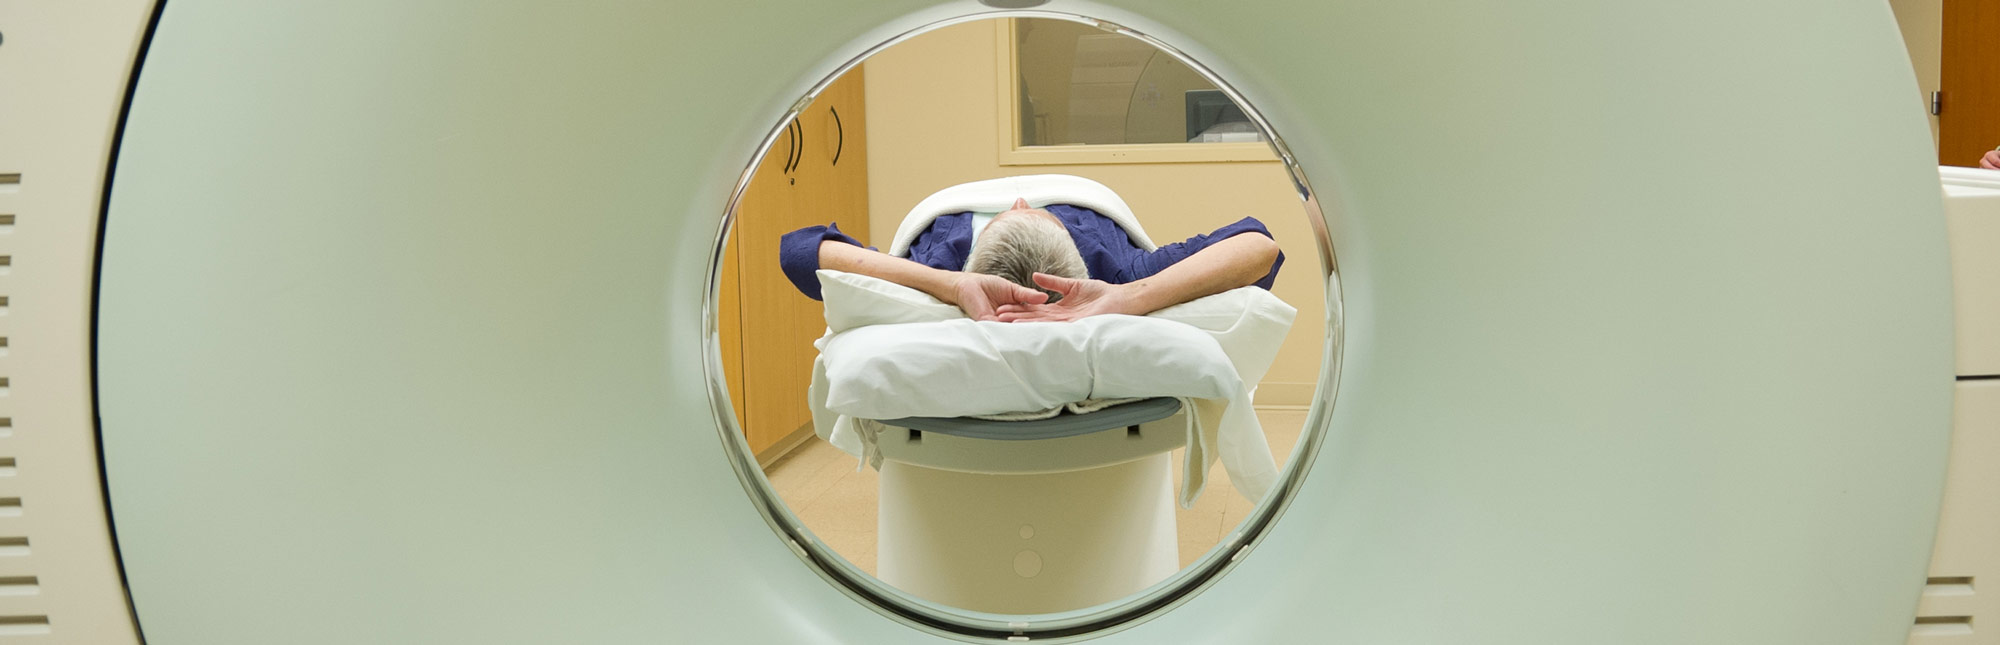 Image of person inside CT Imaging machine at Cascade Medical